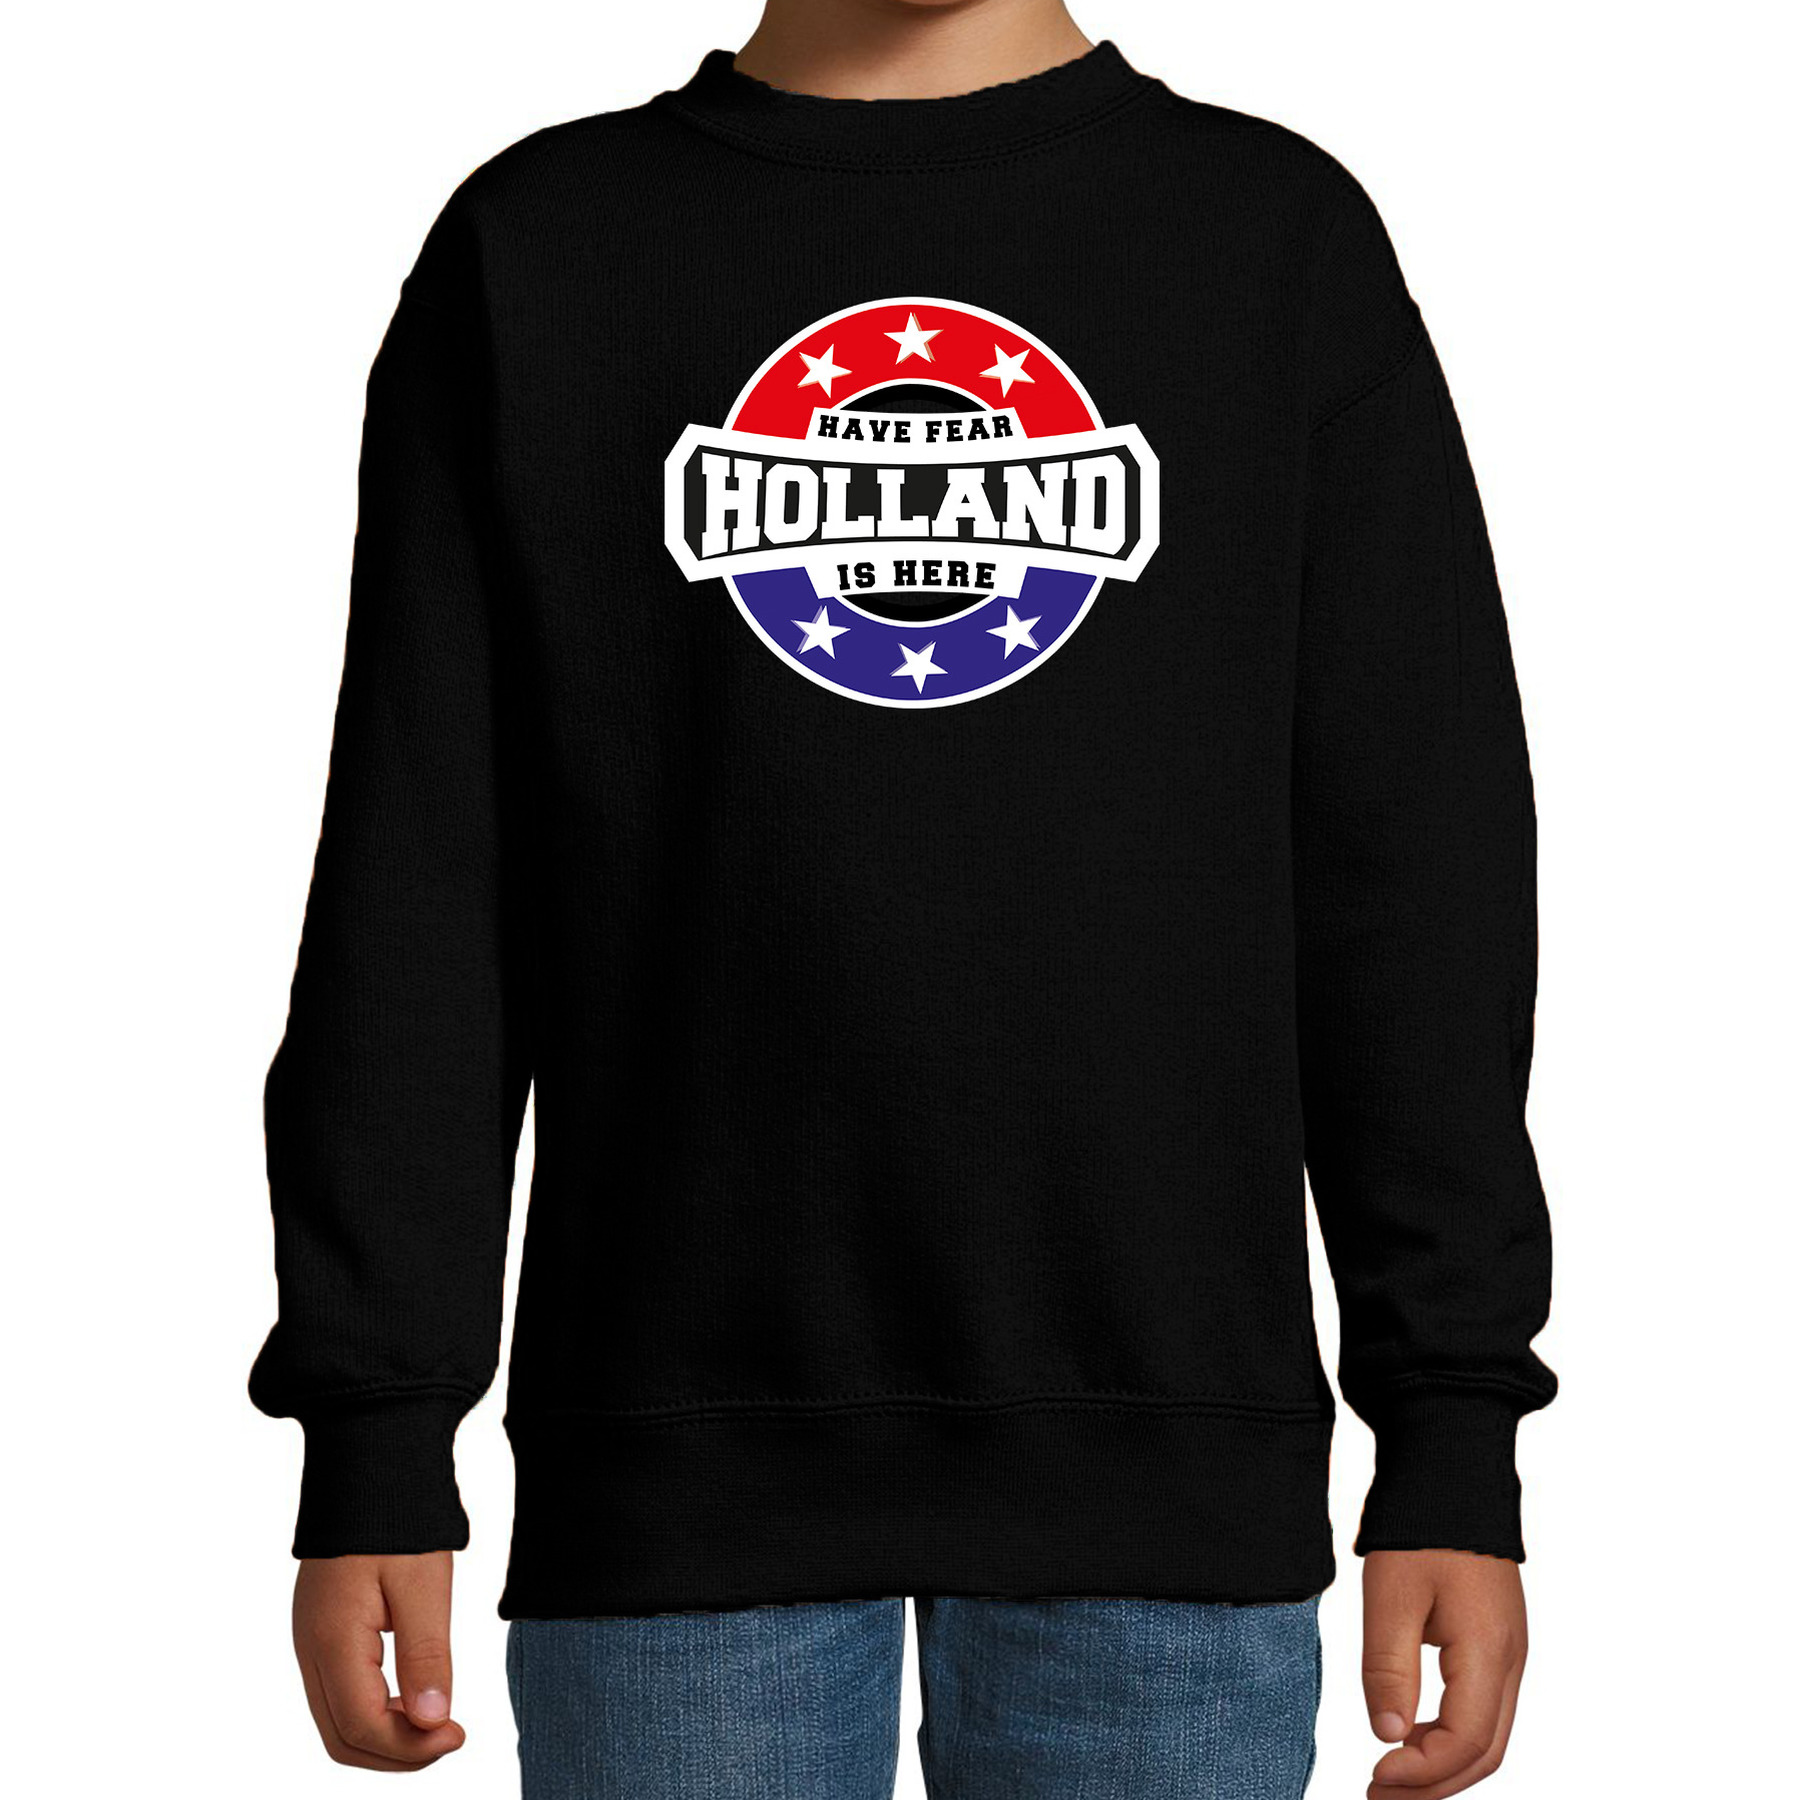 Have fear Holland is here-Holland supporter sweater zwart voor kids